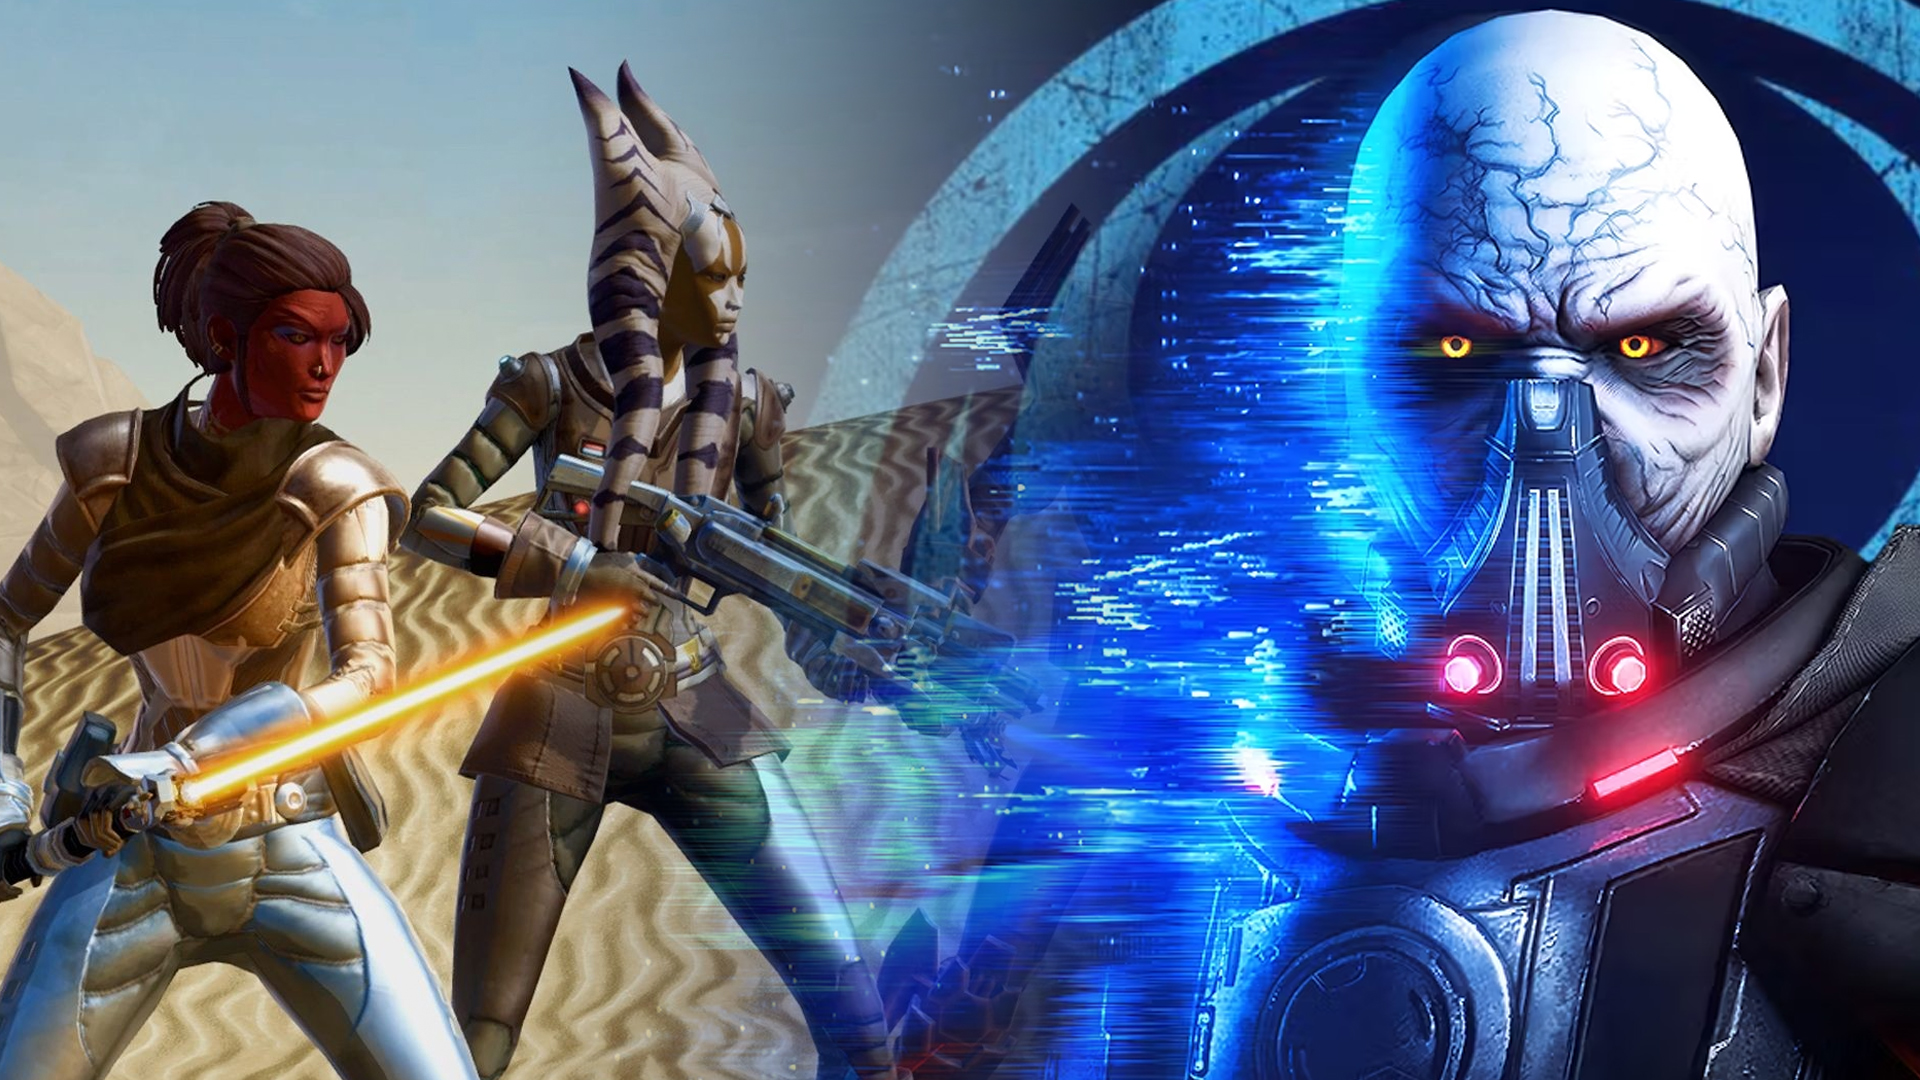 Star wars knight of the old republic 2 русификатор steam фото 48